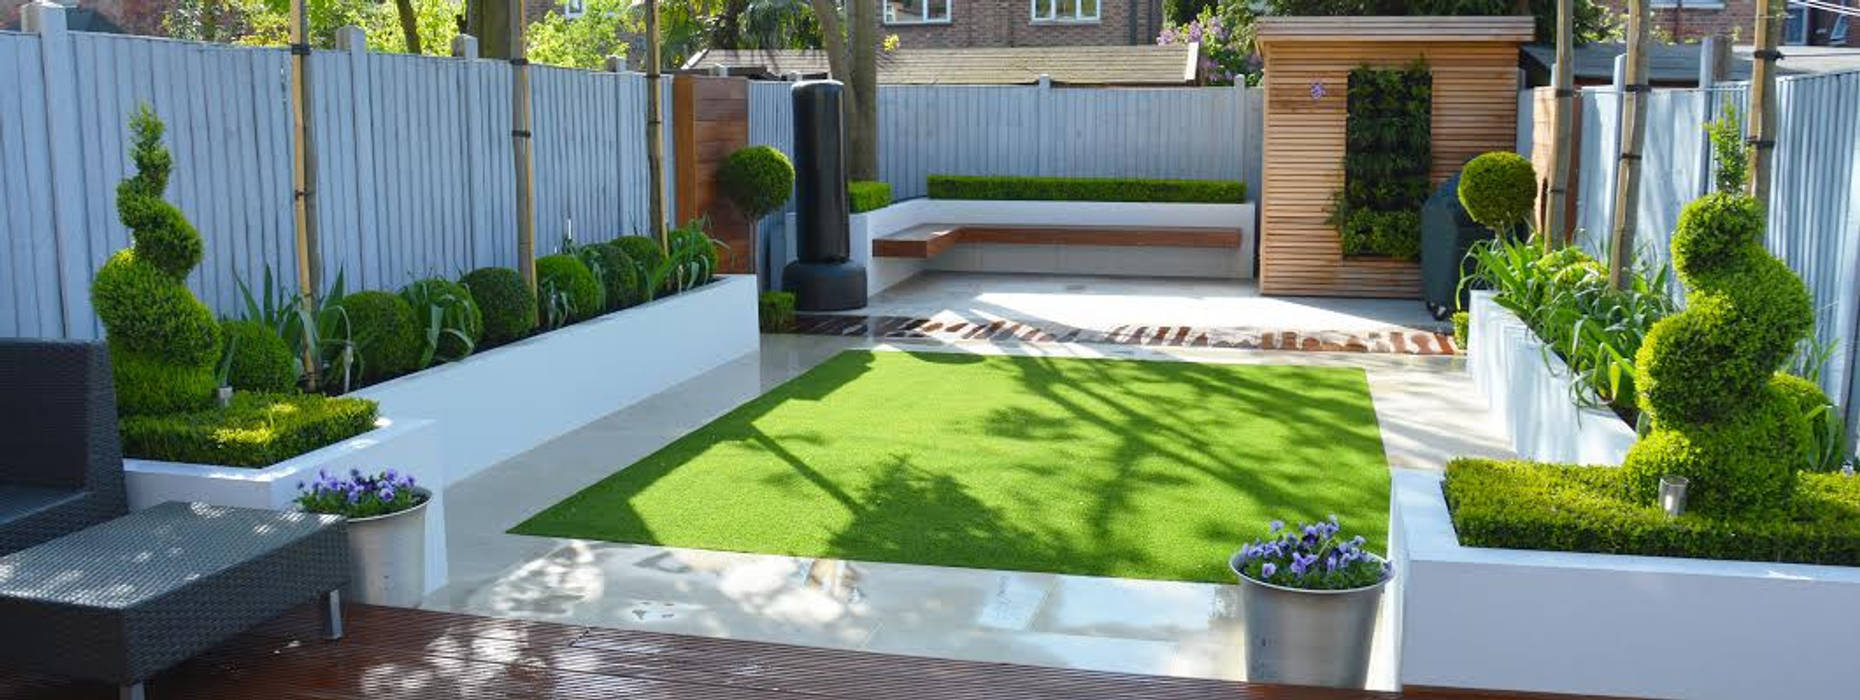 Minimalist Garden: Amazing relaxing space that you will fall in love with, Landscaper in London Landscaper in London Moderner Garten